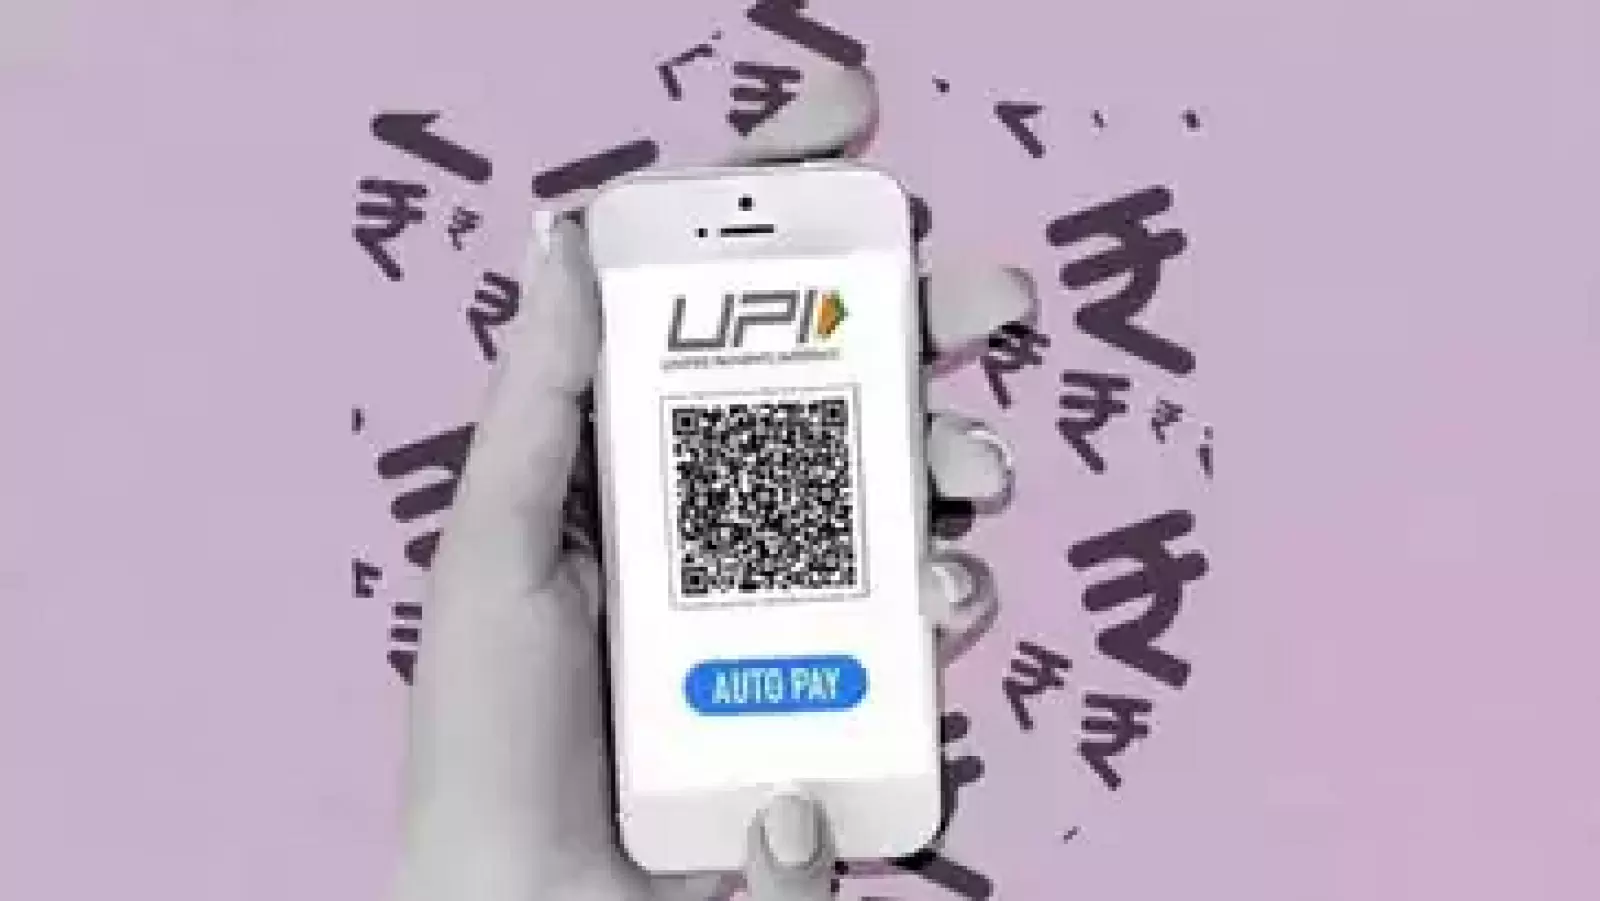 UPI Pin Reset: If you want to change your UPI PIN, you can reset it from BHIM app, just follow these steps